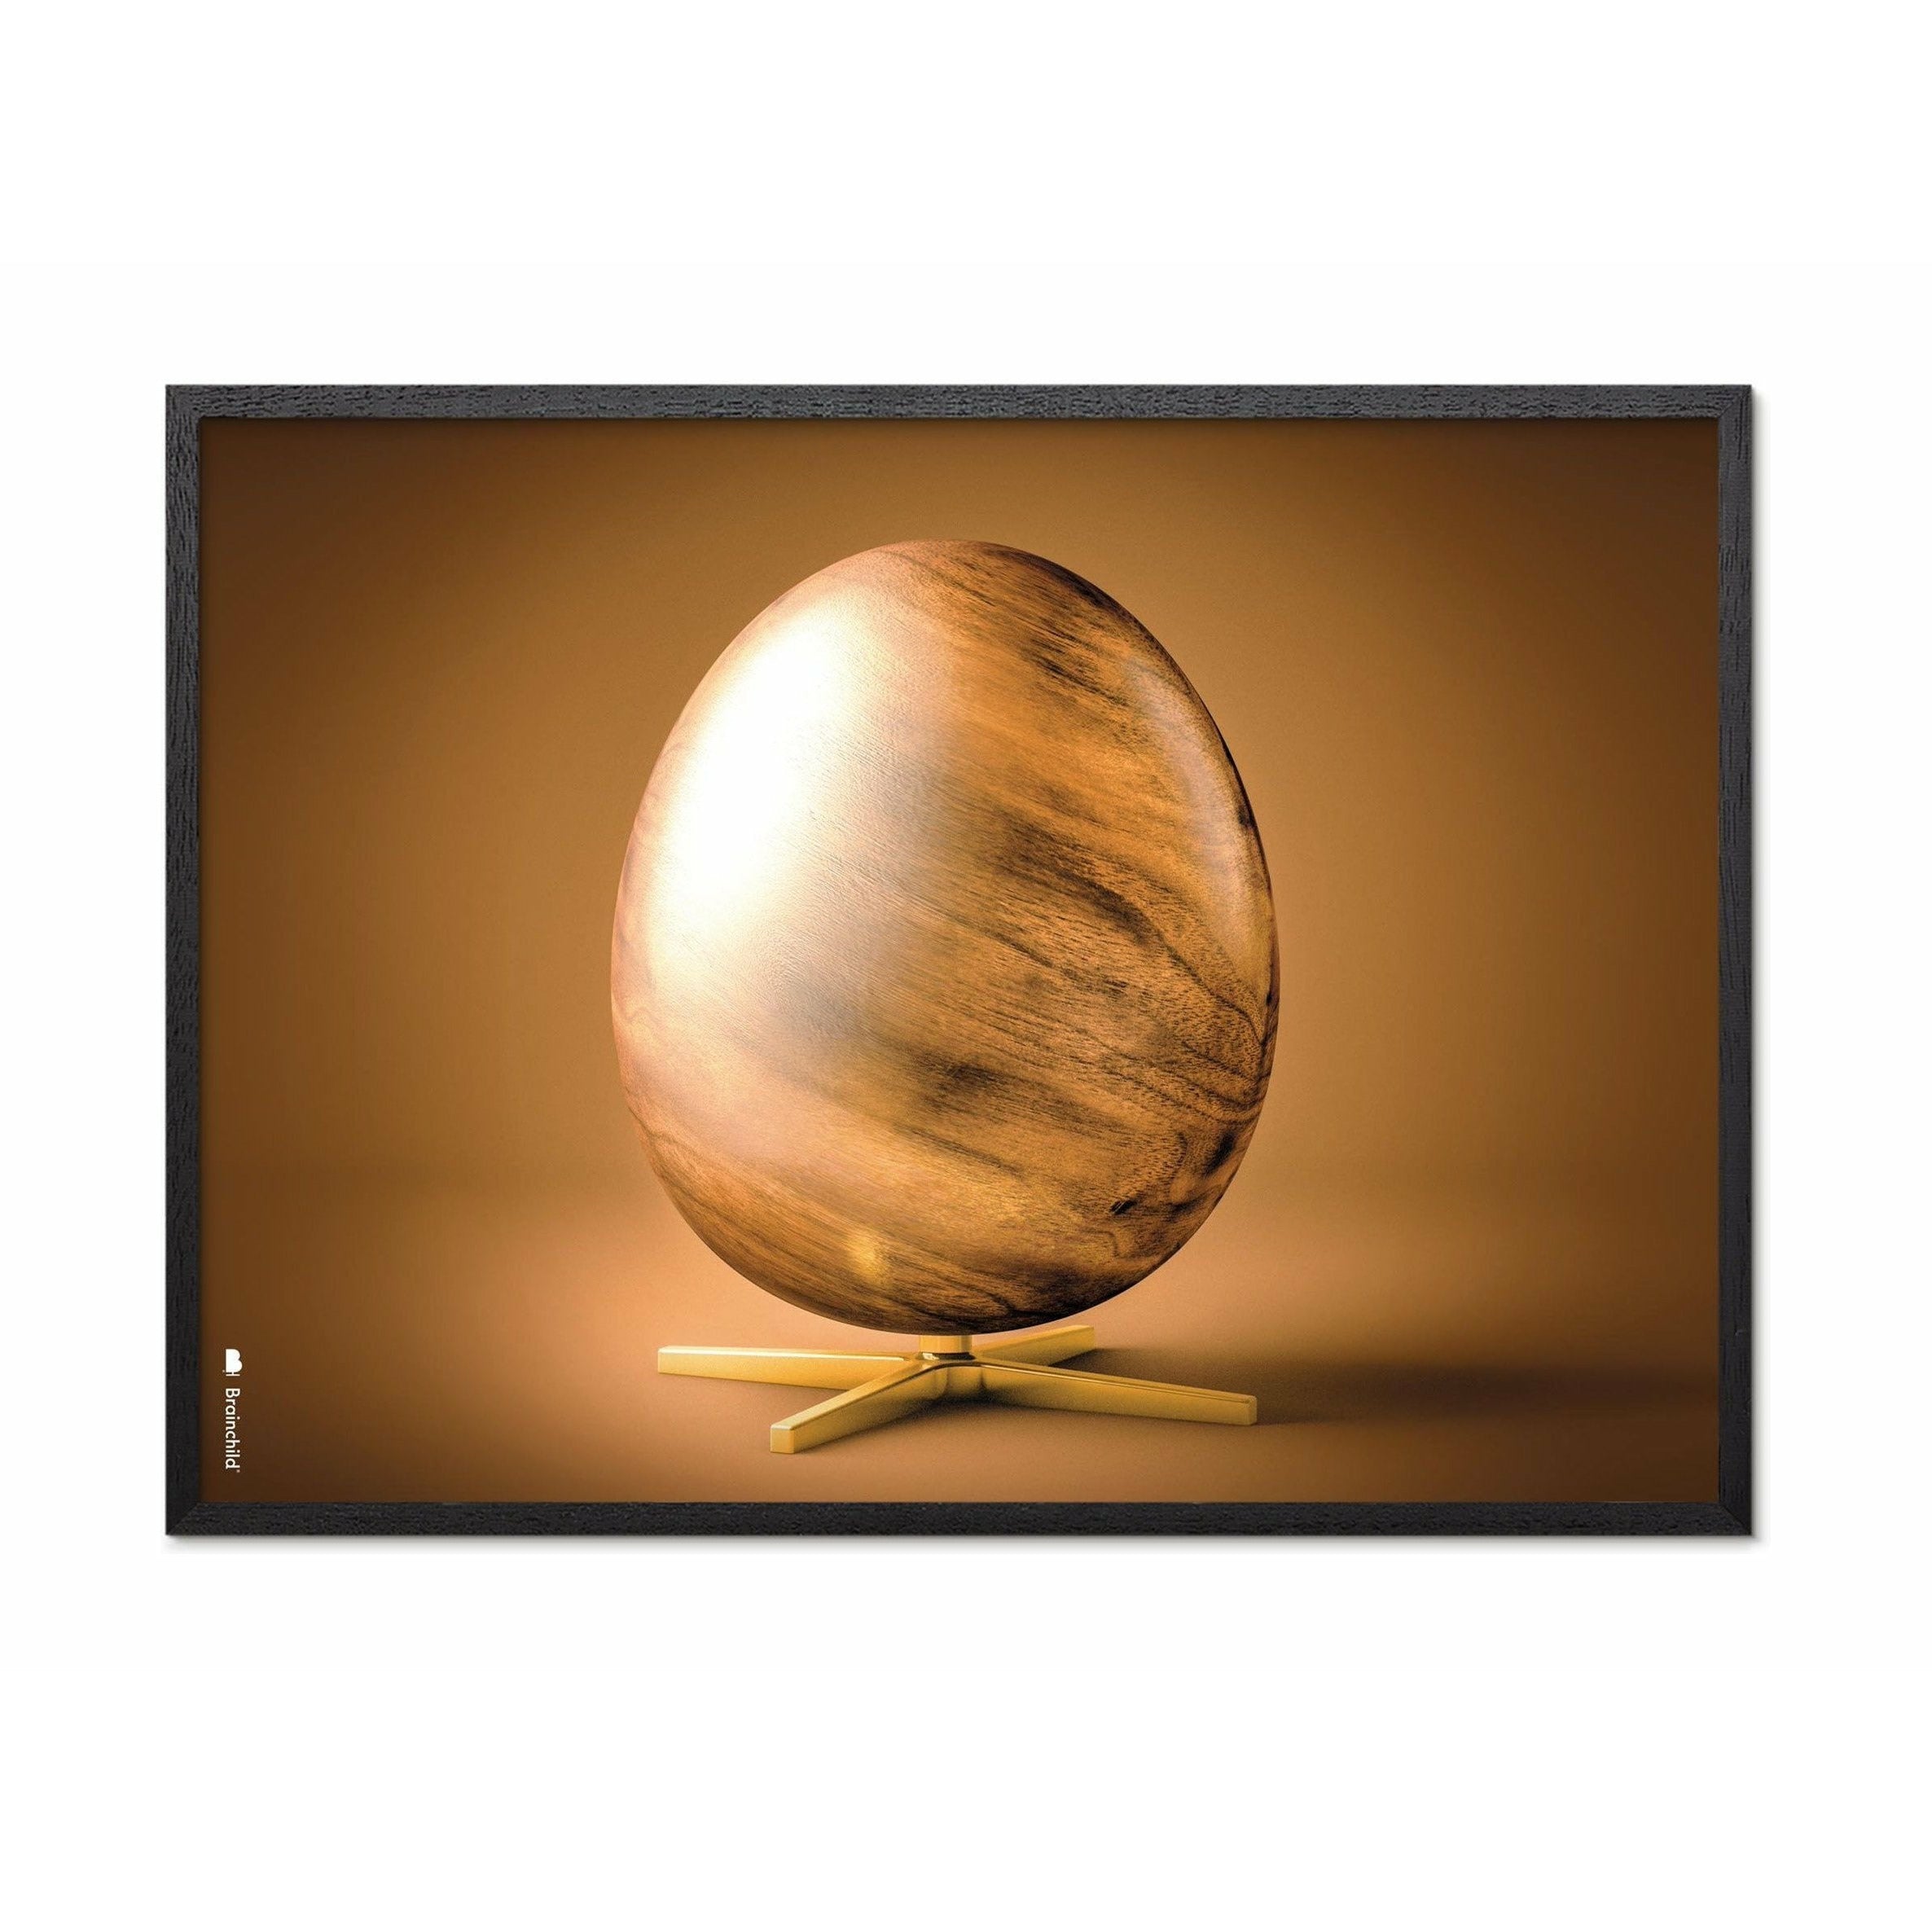 Brainchild Egg Cross Format Poster, Frame In Black Lacquered Wood A5, Brown